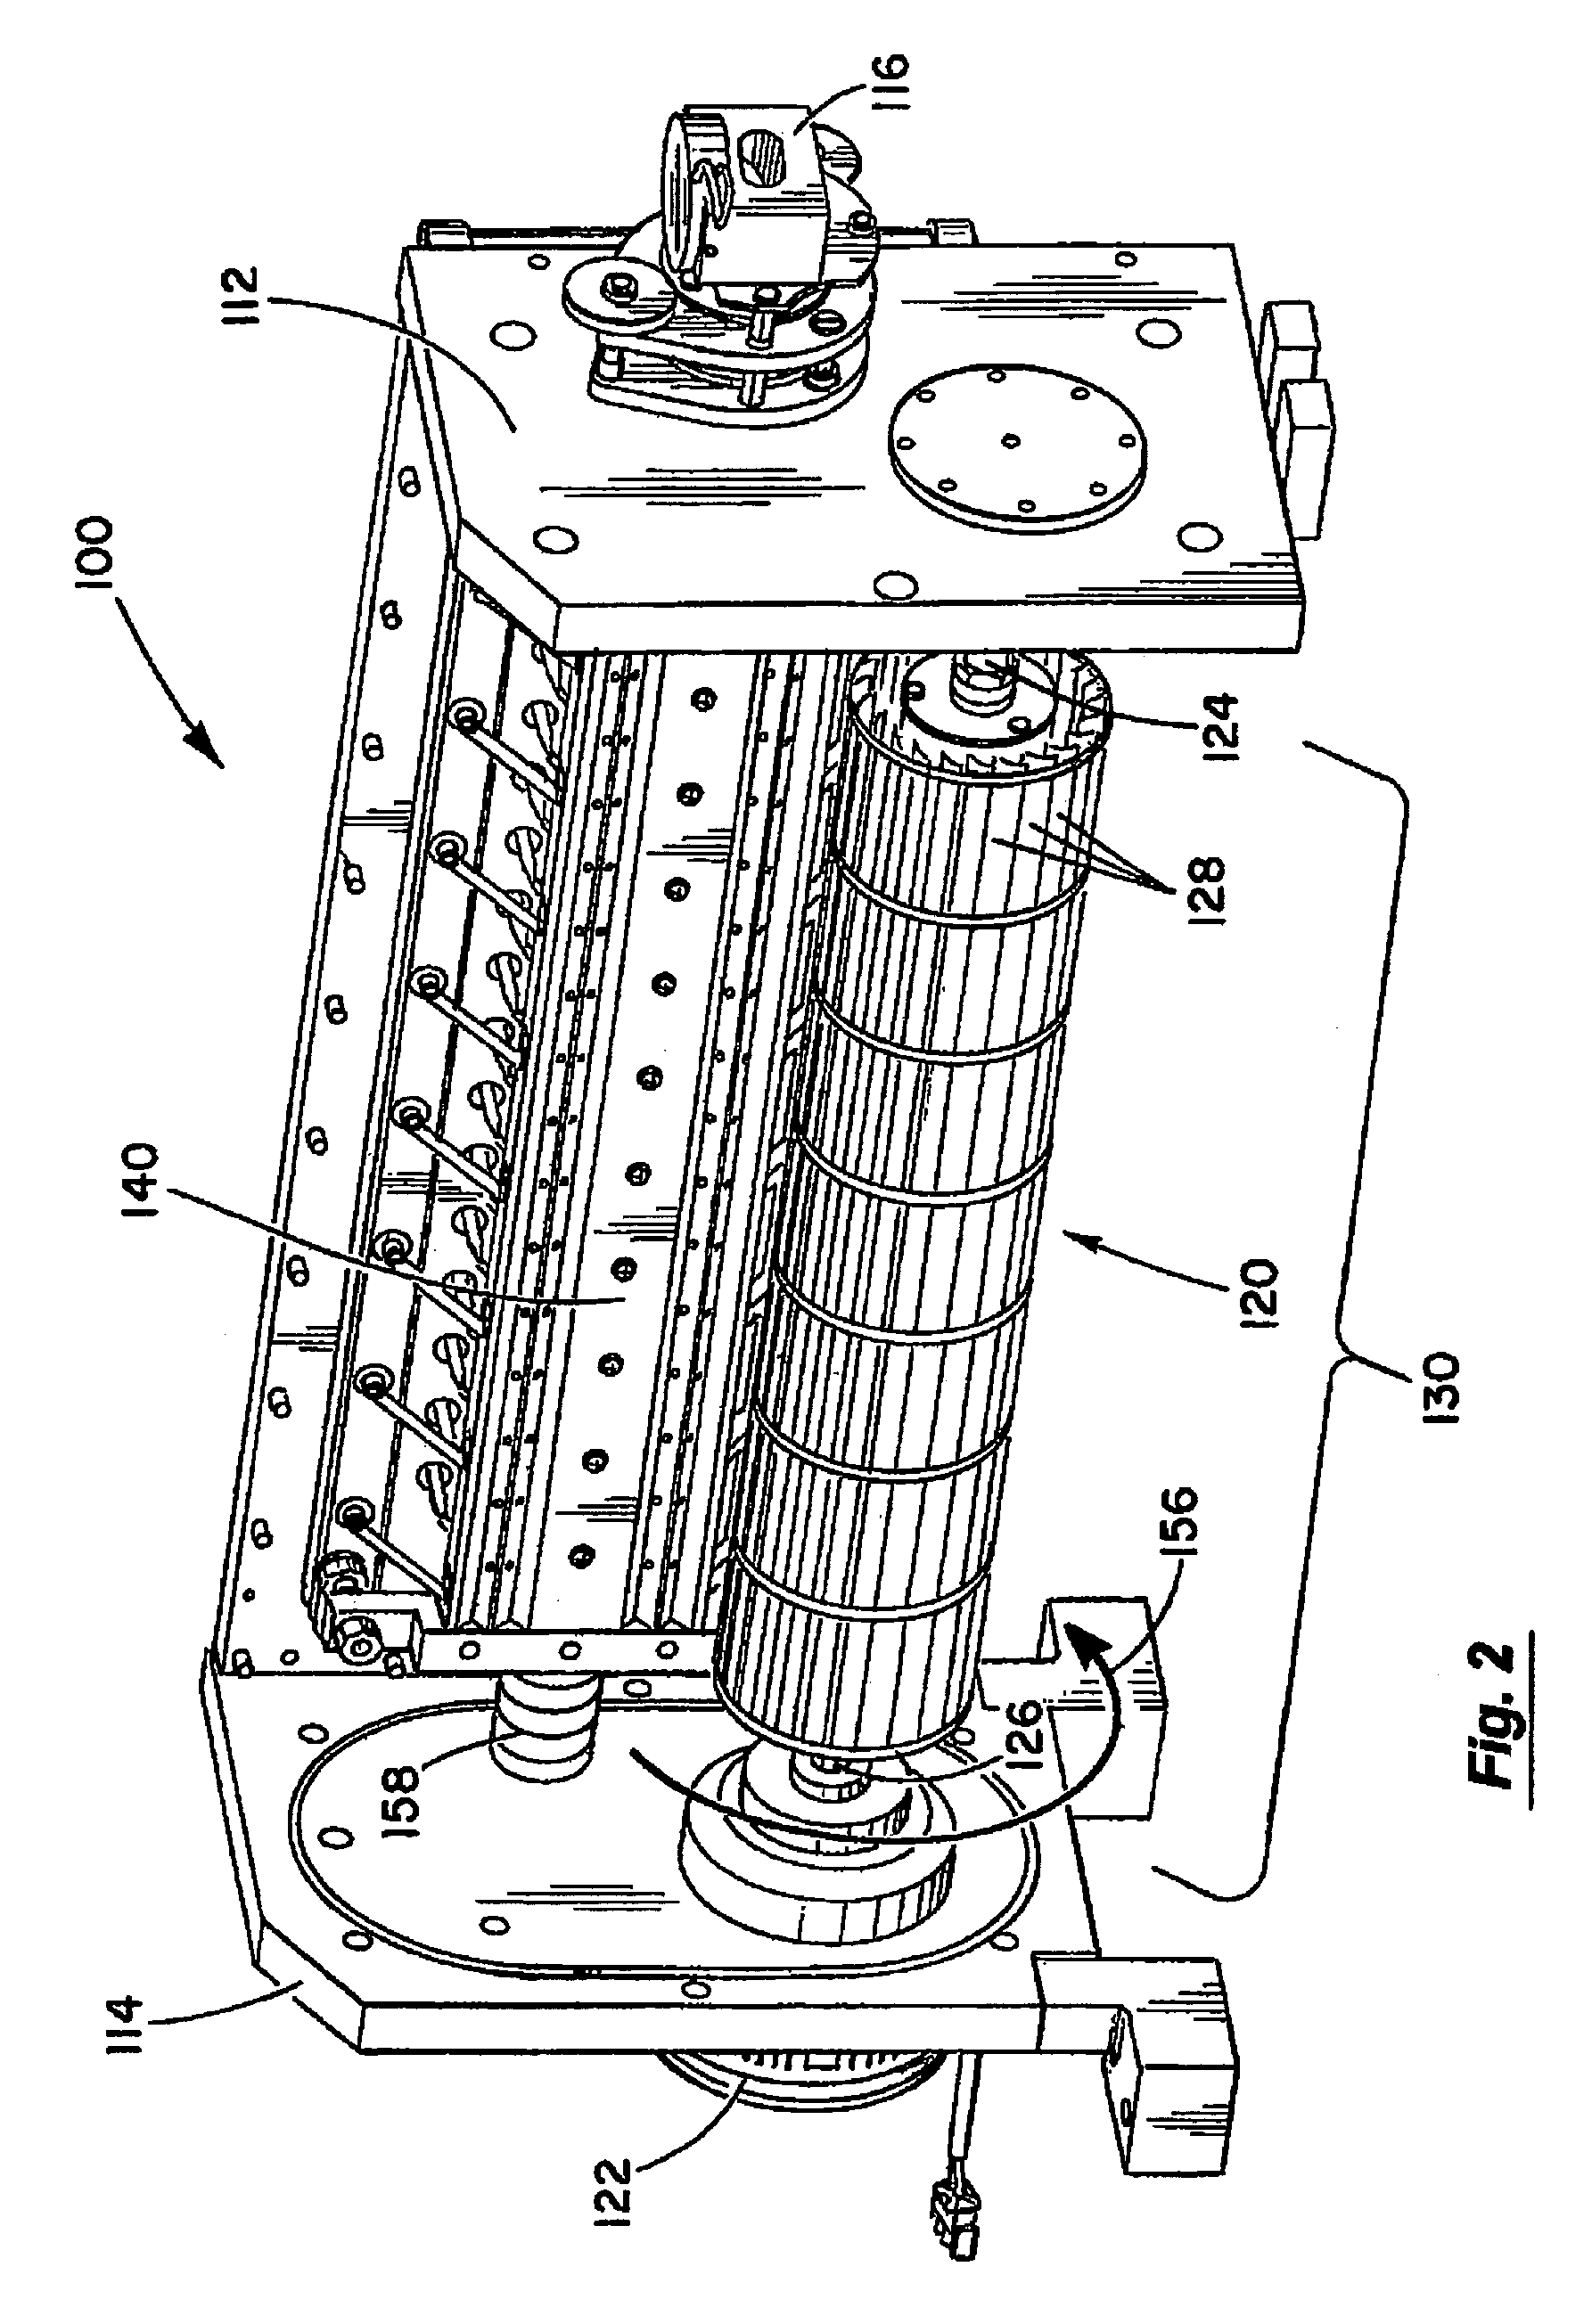 Passive gas flow management and filtration device for use in an excimer or transverse discharge laser